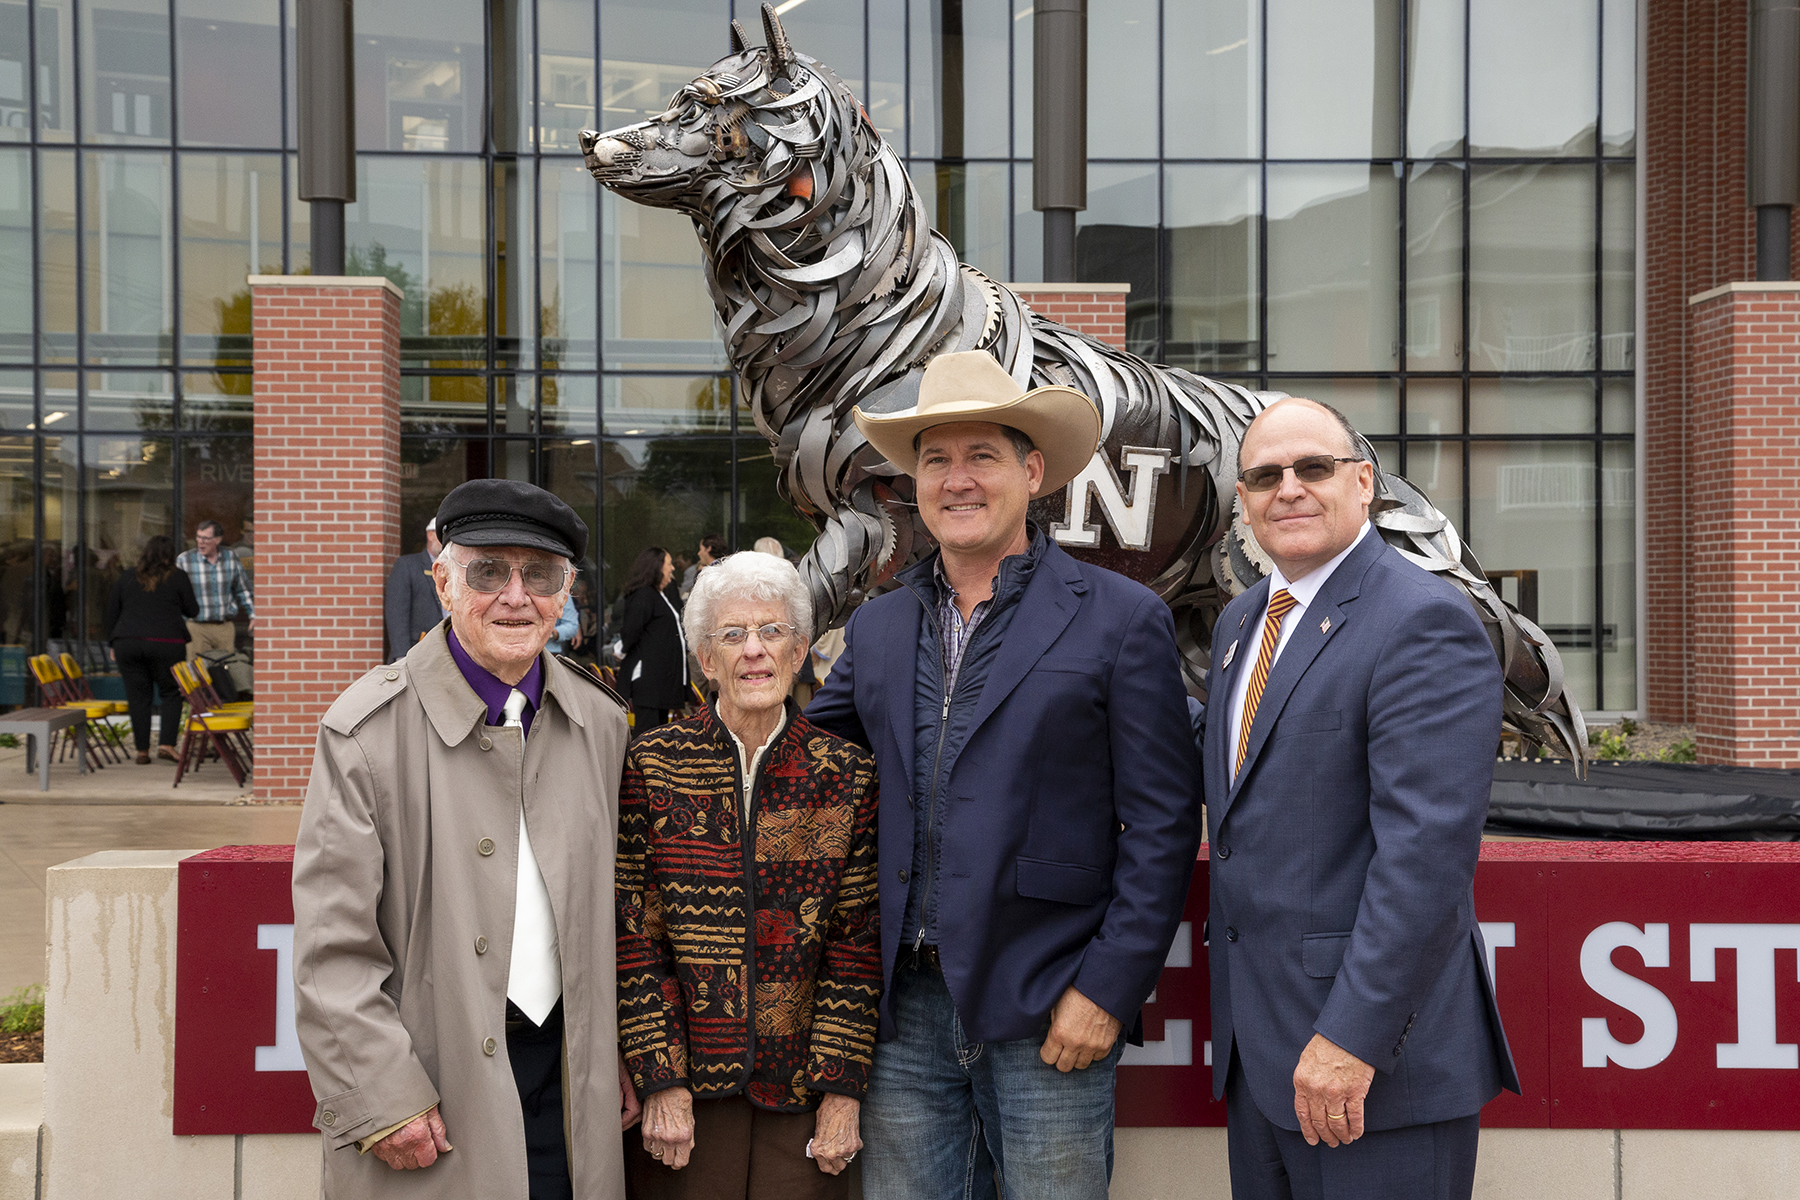 Ka and Sally Squire and sculptor John Lopez posing together in front of the NSU Wolf statue